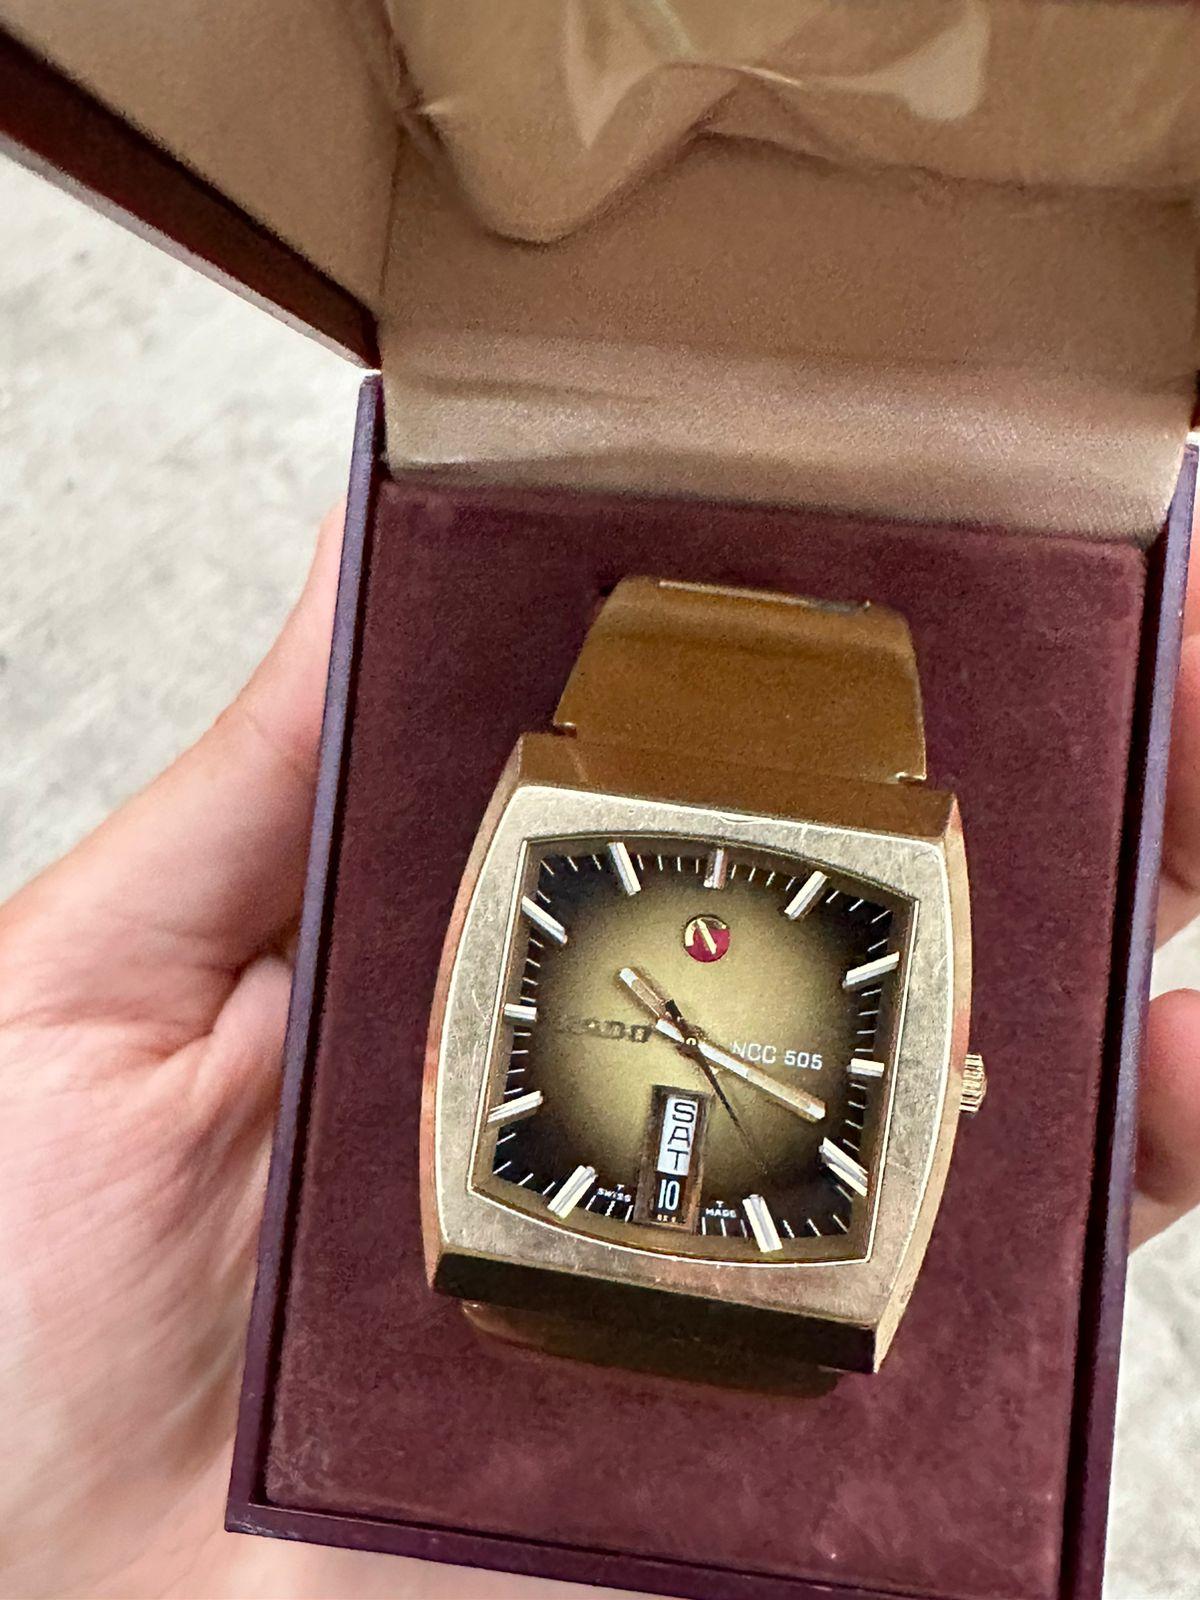 Brand: Rado

Model: Ncc 505

Country Of Manufacture: Switzerland

Movement: Automatic 

Case Material: Gold Plated Stainless steel

Measurements : Case width: 36 mm. (without crown) x 38 mm

Band Type : Gold Plated Stainless steel

Band Condition :